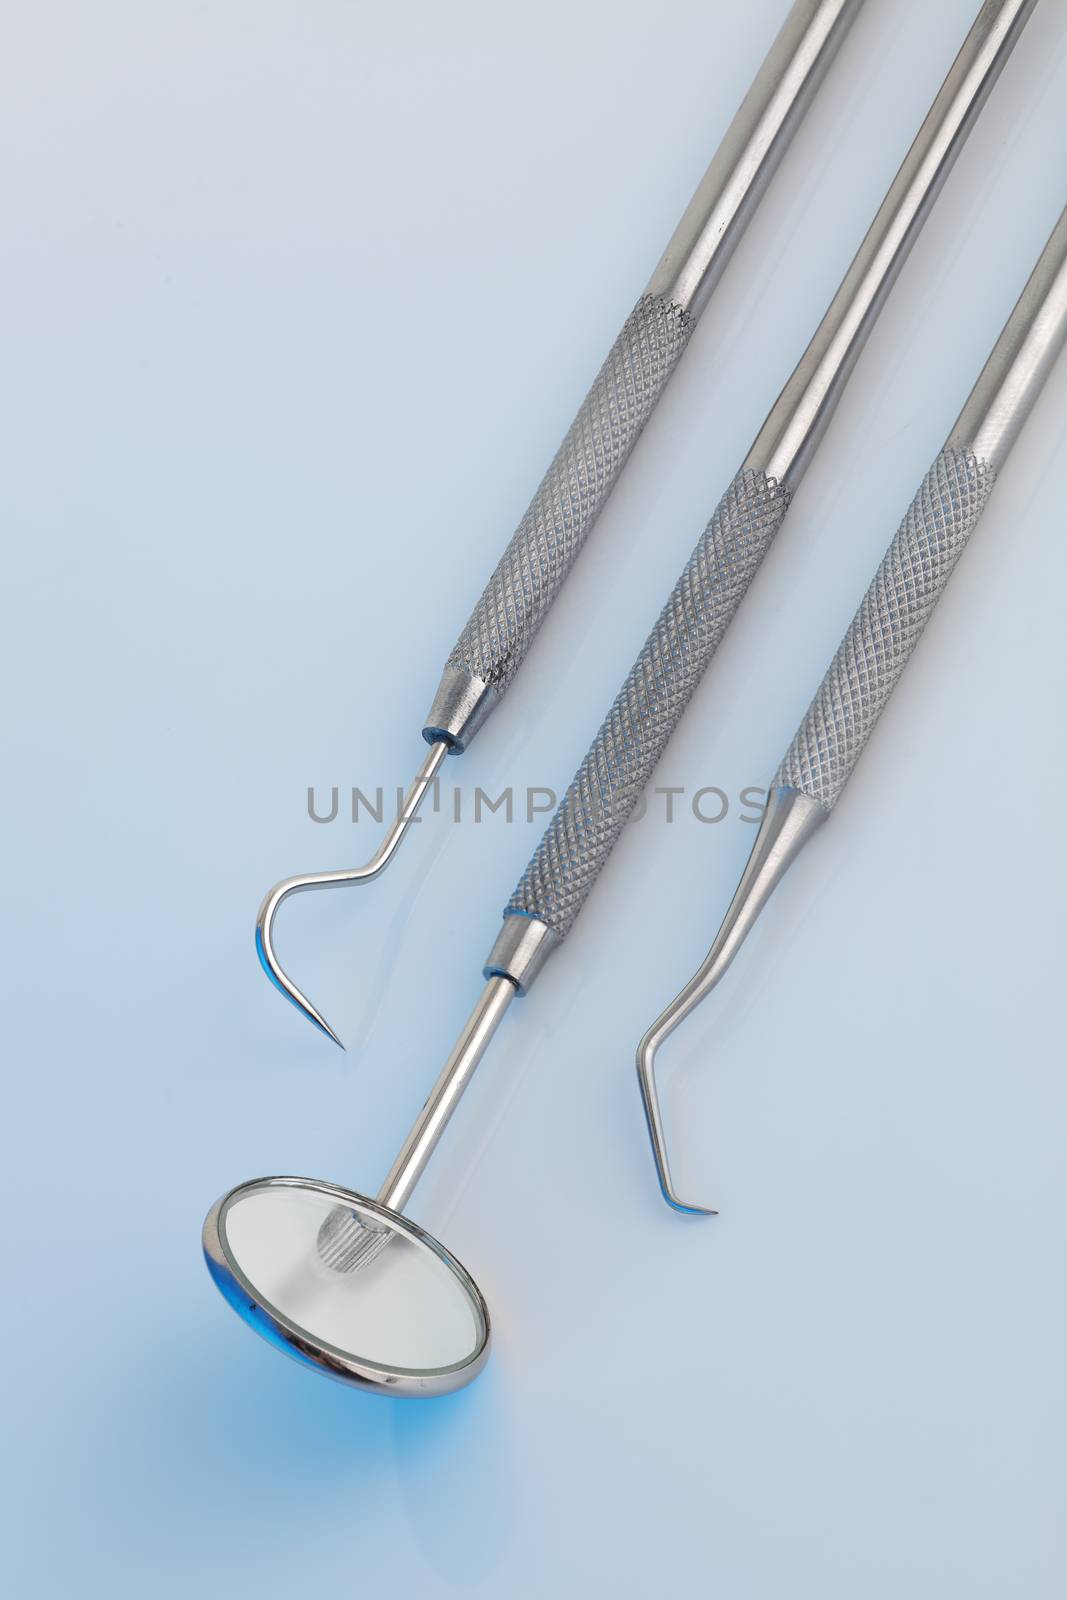 Dental tools in a clinical blue light by VivacityImages